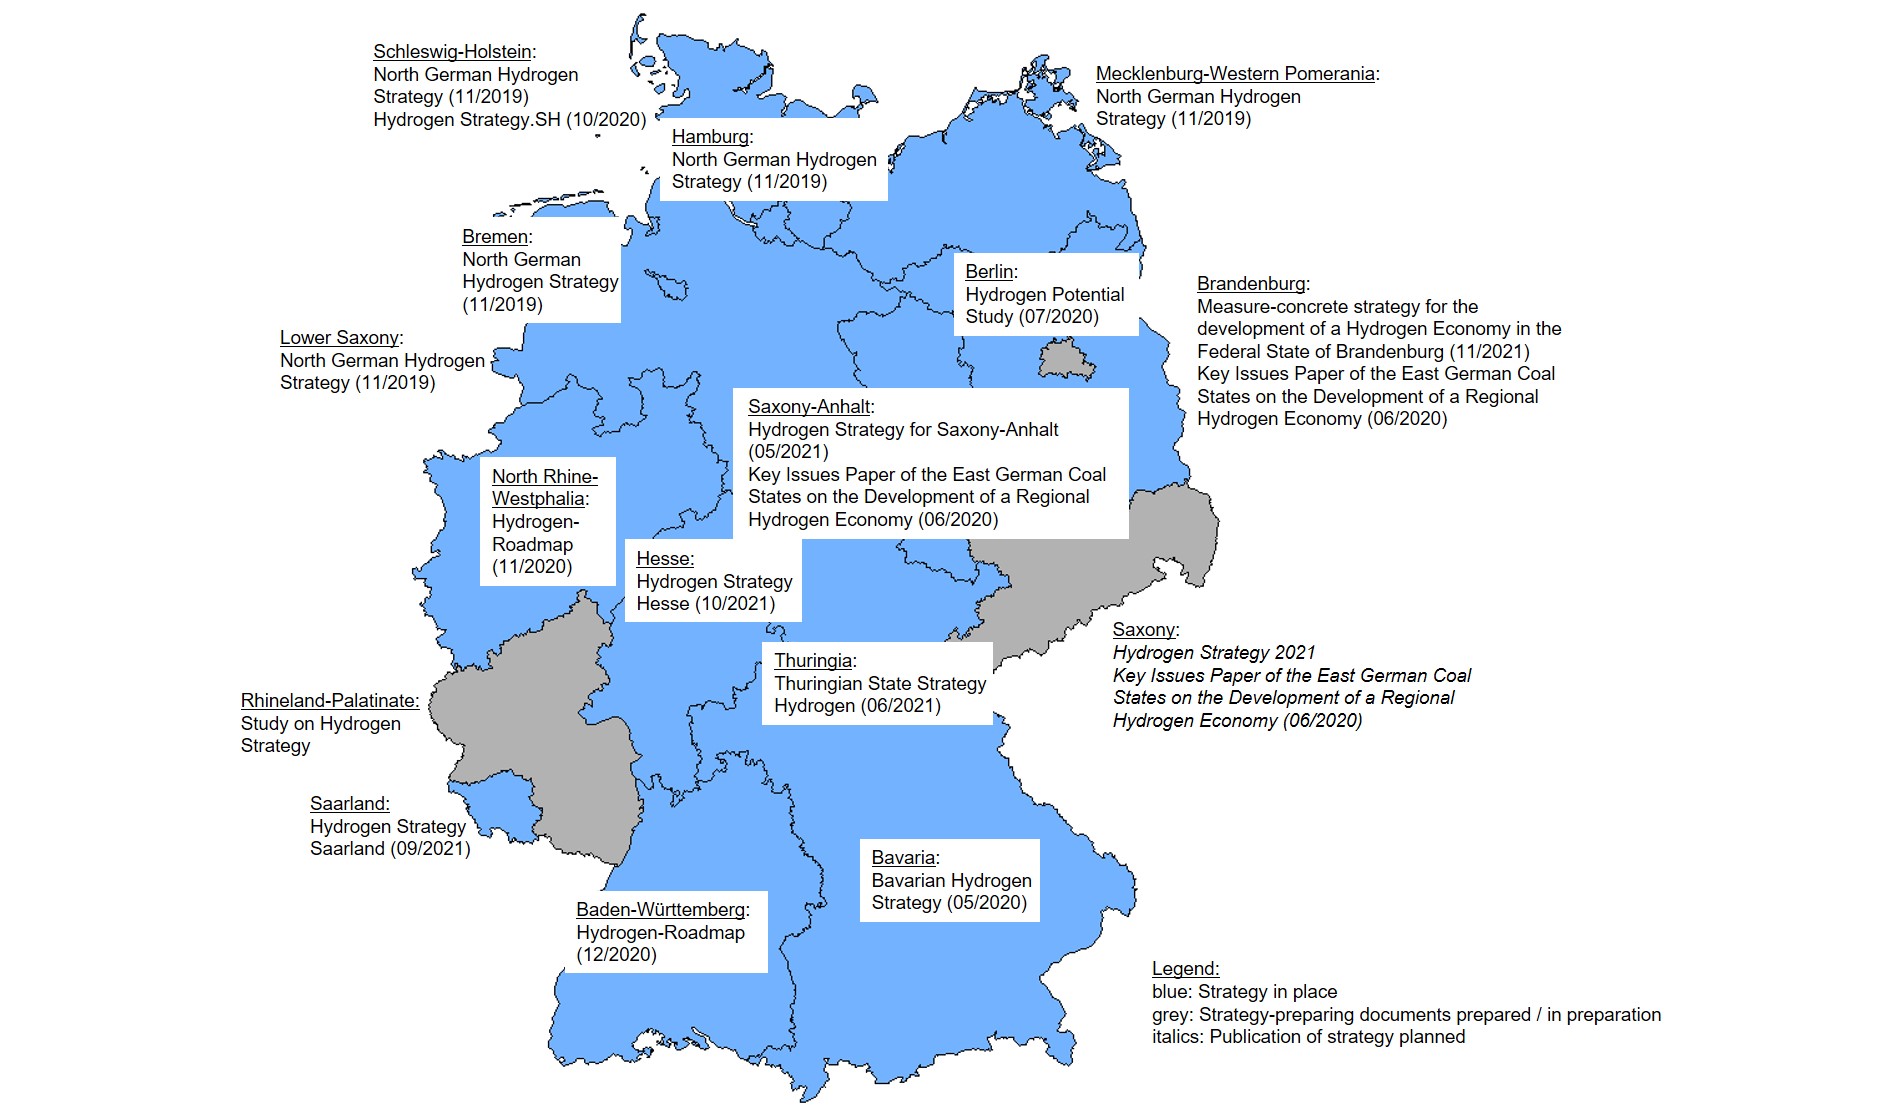 Figure 1:	Overview of hydrogen strategies in Germany.  Source: Authors’ own illustration based on document analysis. Map created with ArcMap 10.4, geodata: © GeoBasis-DE / BKG (2020).